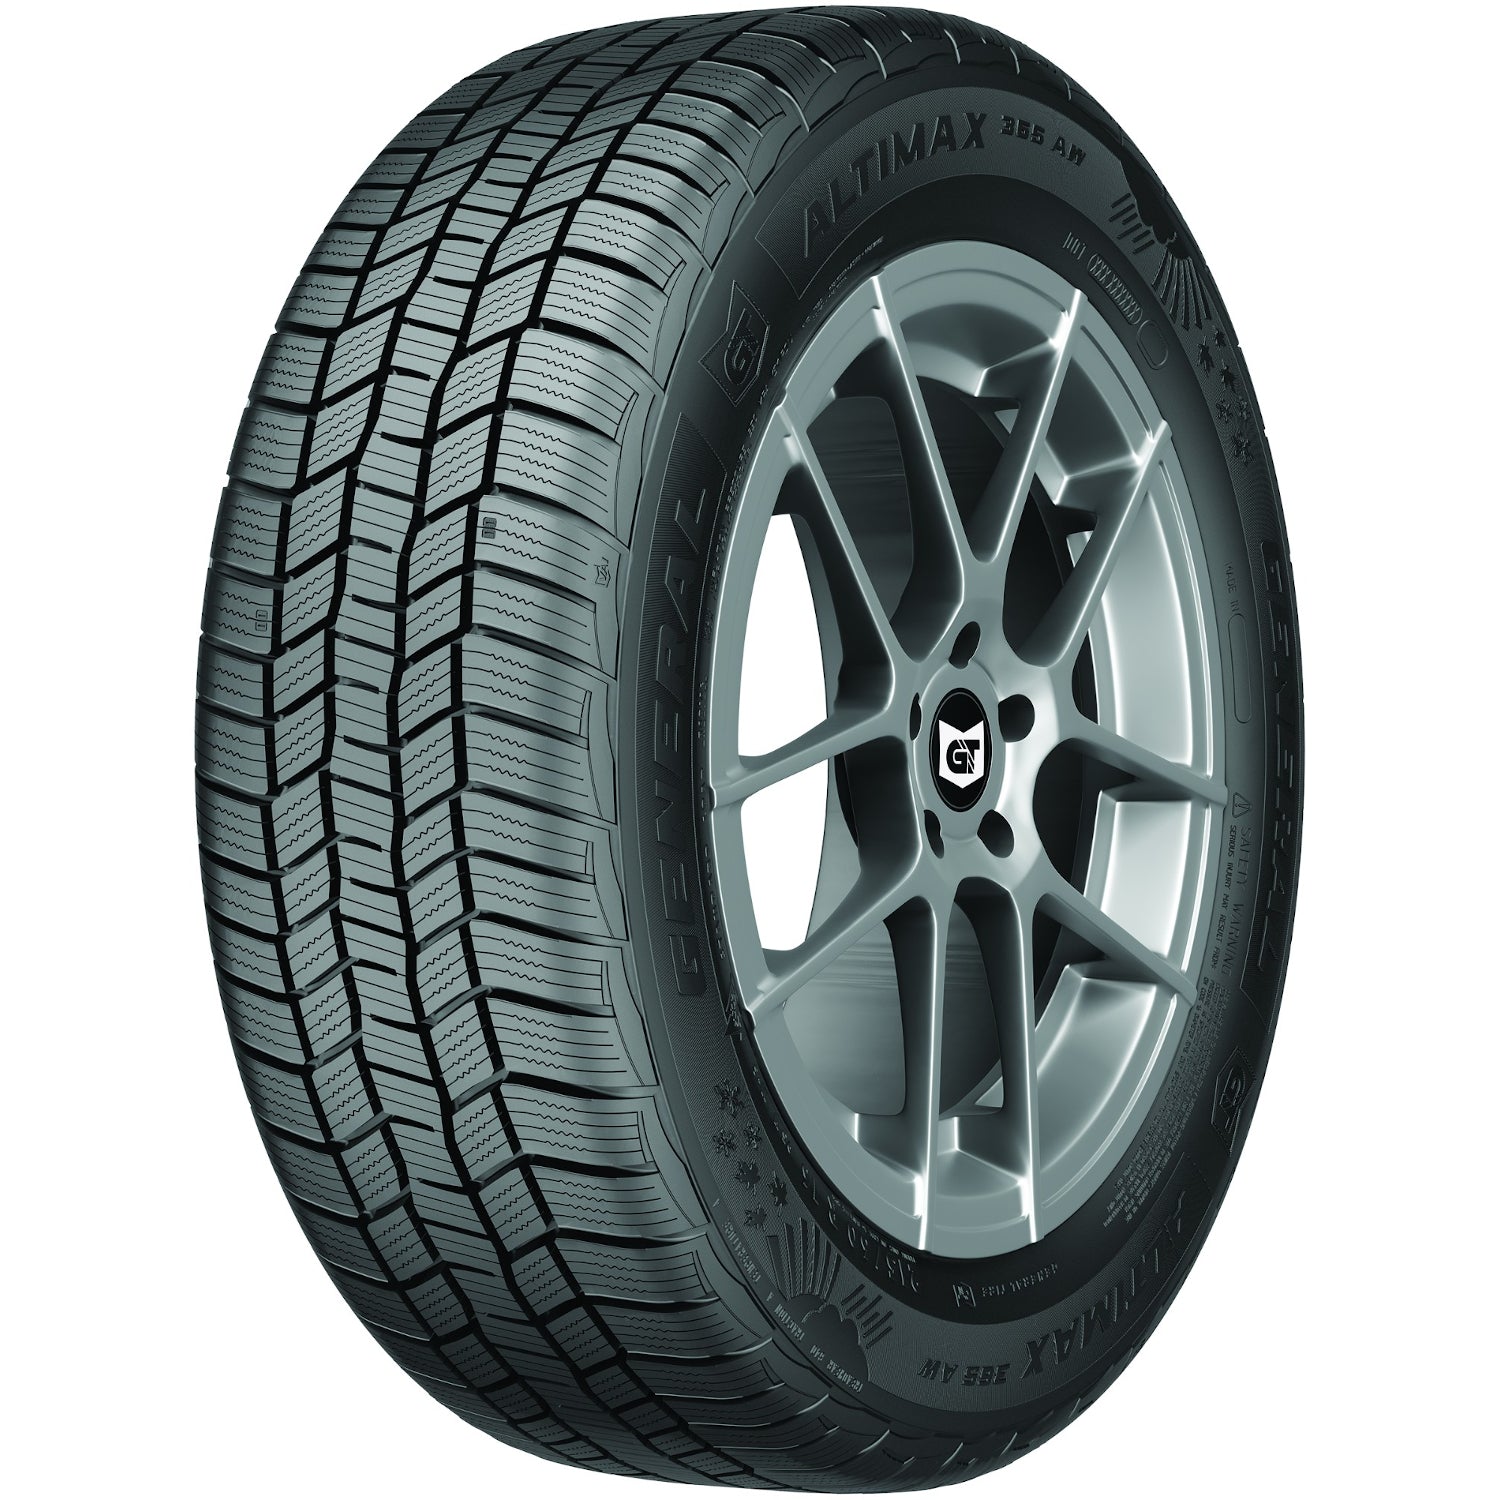 GENERAL ALTIMAX 365AW 215/55R17 (26.3X8.5R 17) Tires